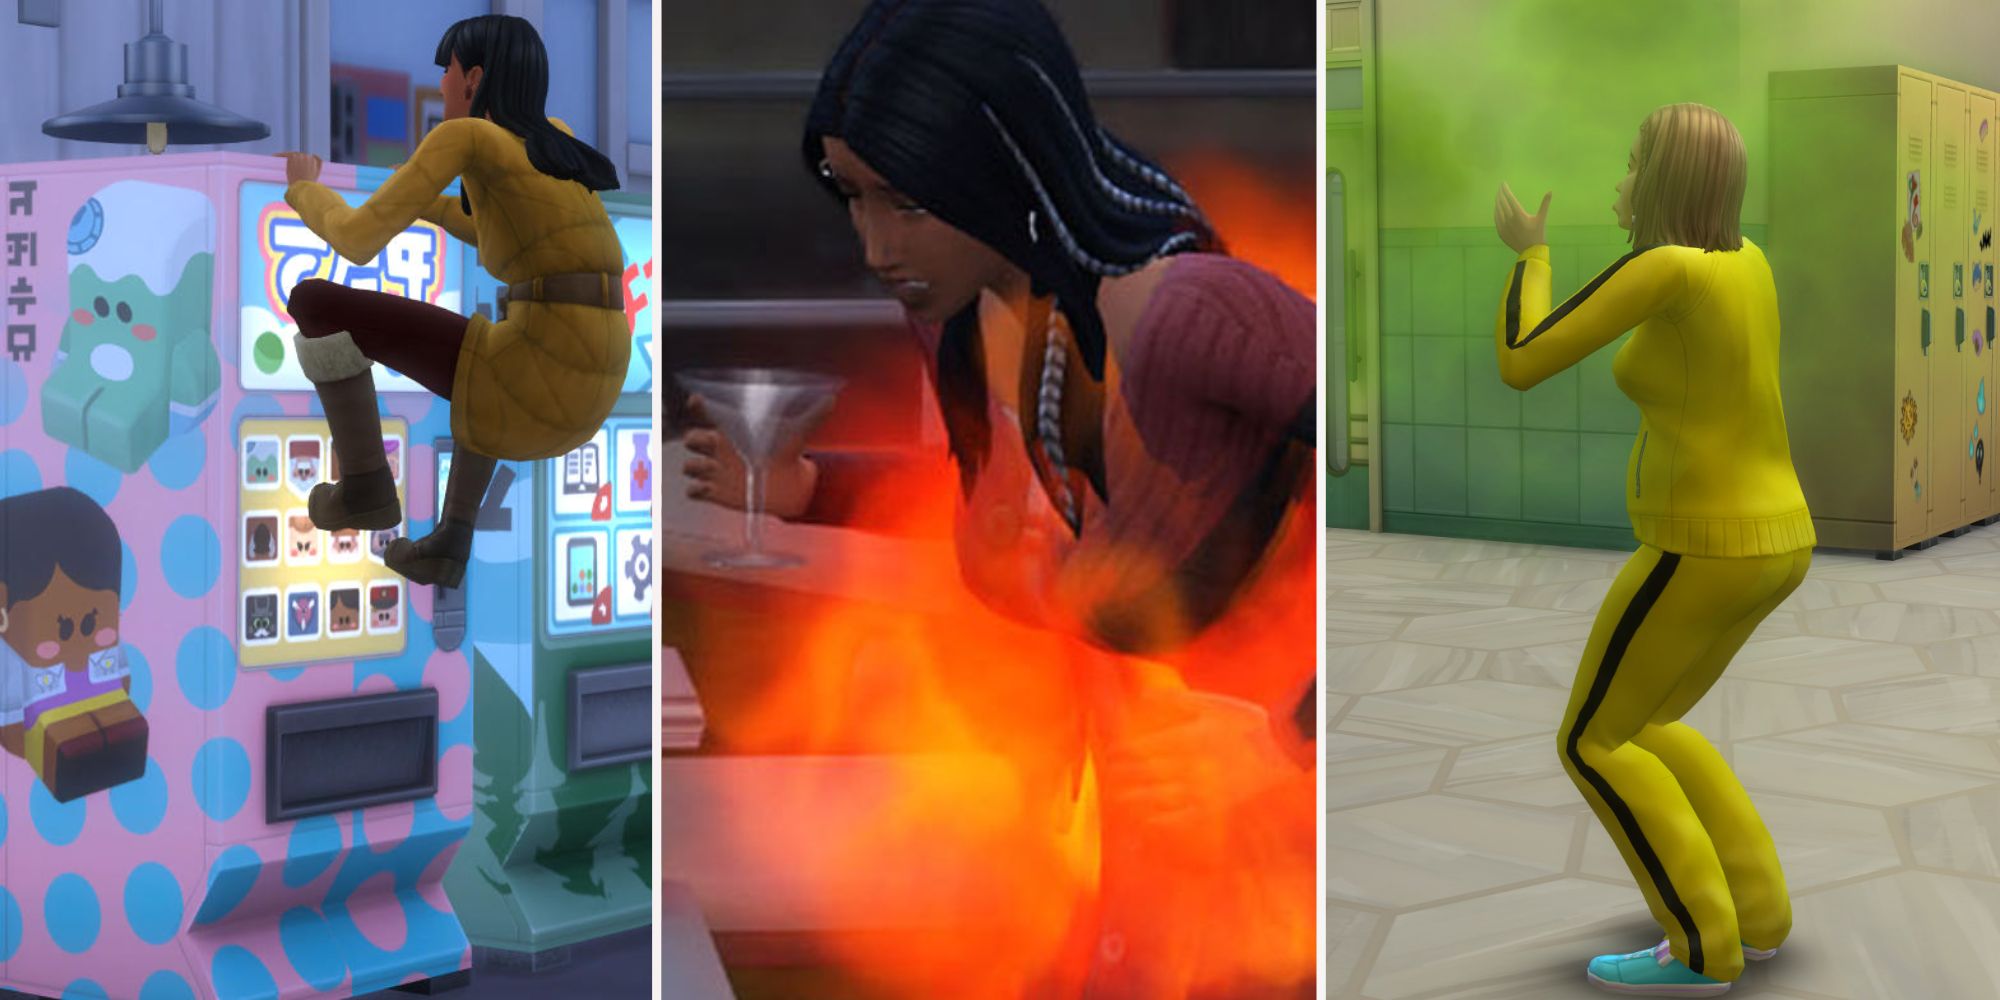 Guide: Death Types and Killing Sims in The Sims 4